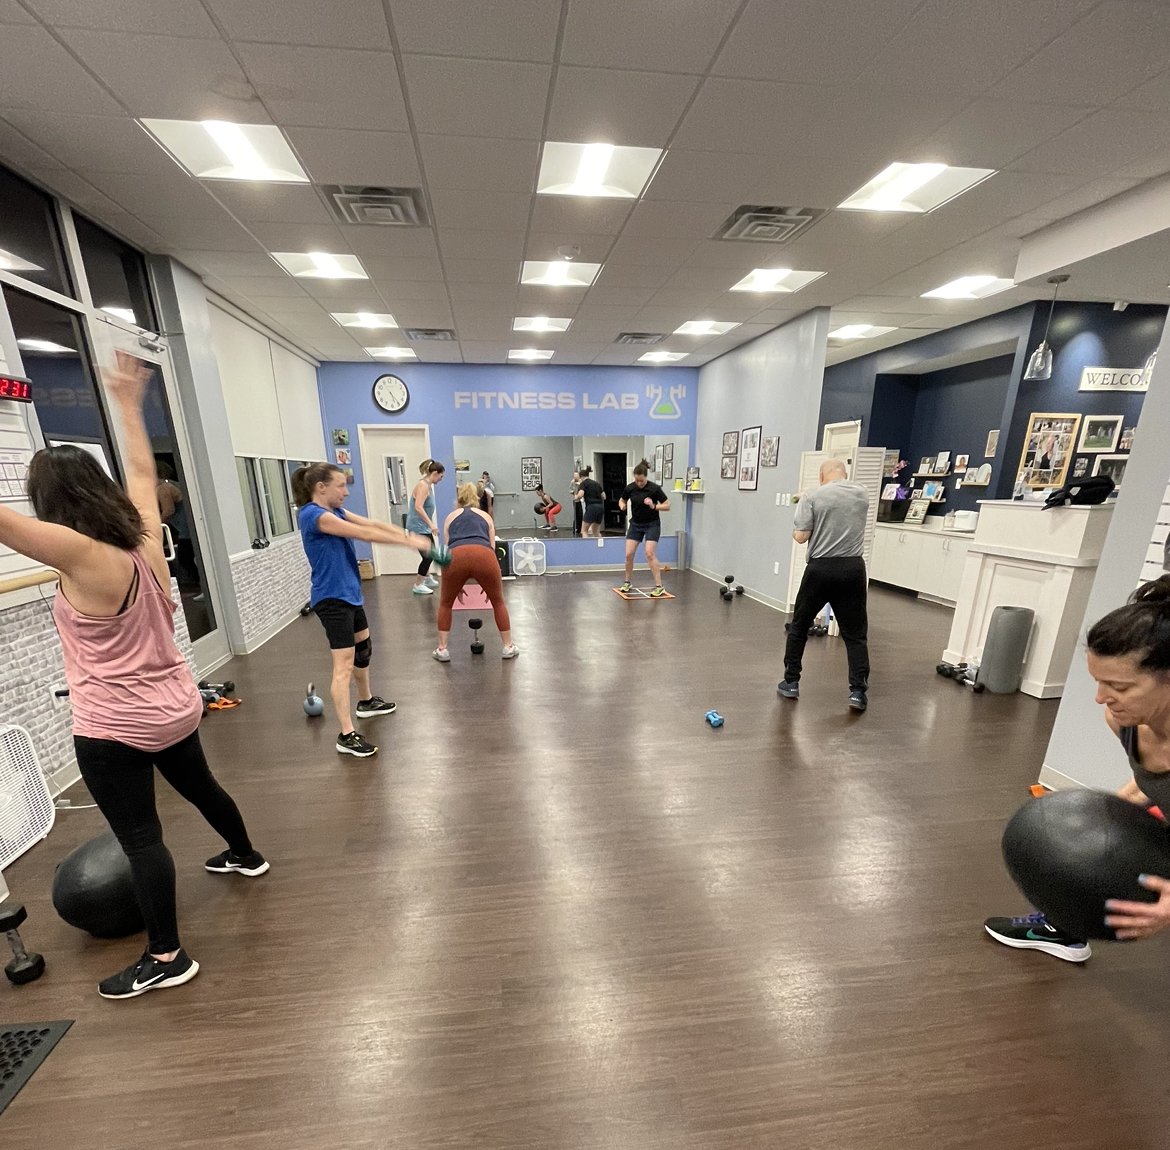 About Us - The Fitness Lab, oir fitness